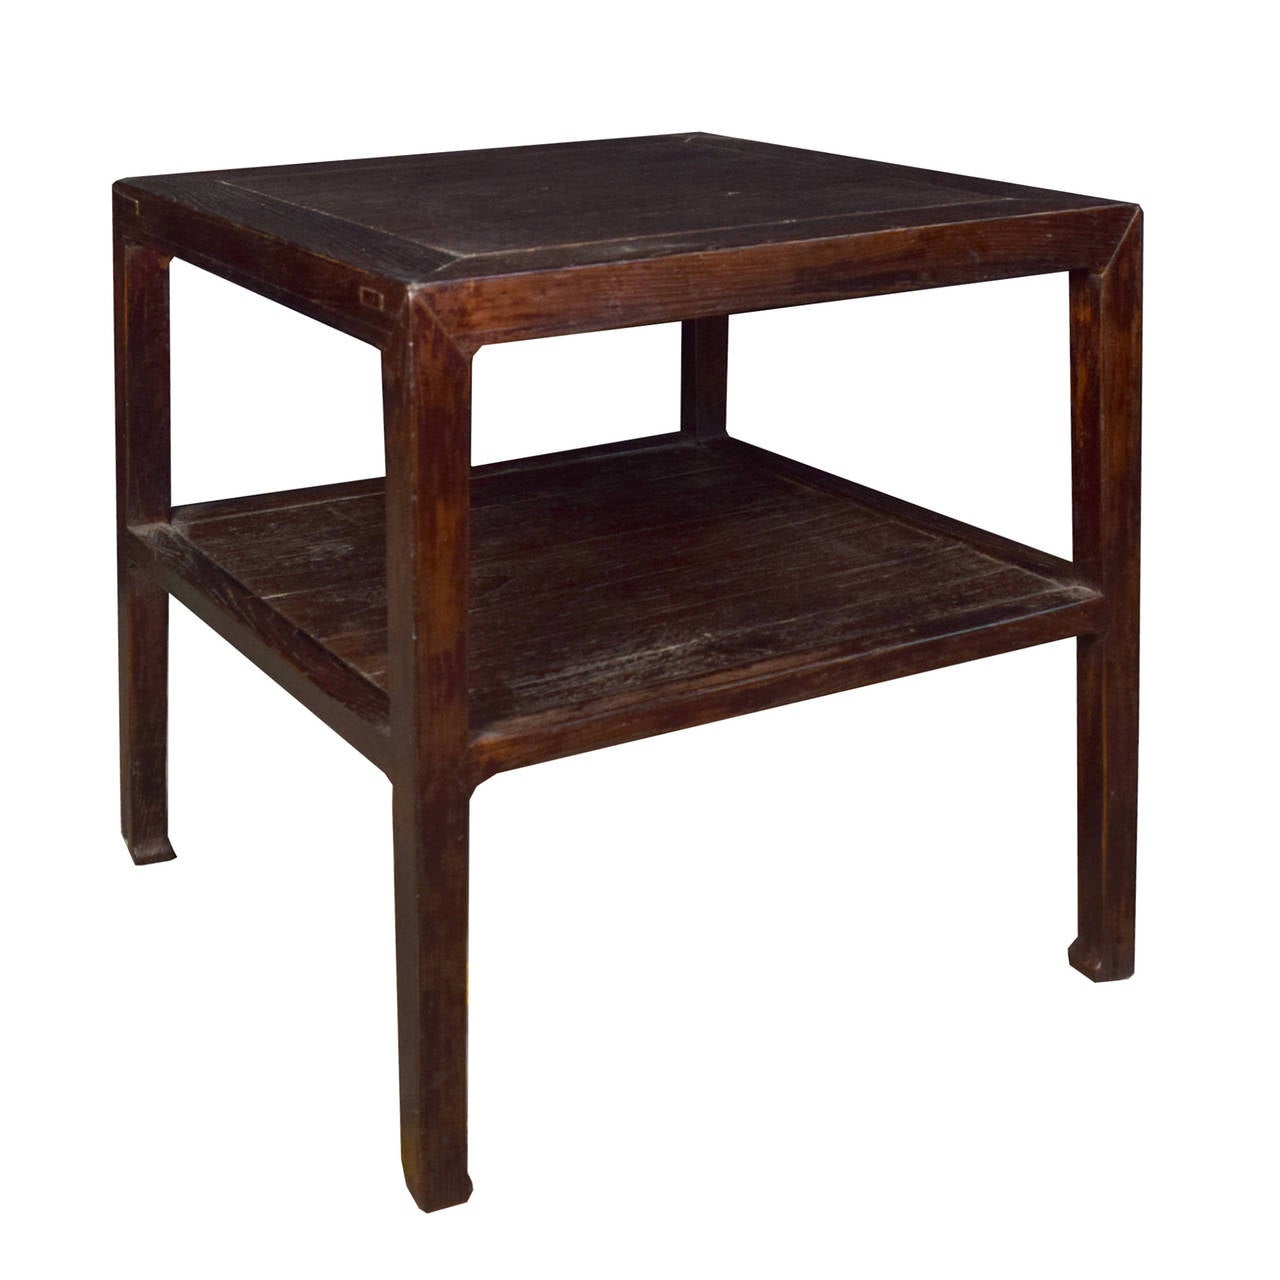 A square table from Shanxi Province, China with one shelf and legs ending in hoof feet made of Chinese Northern elmwood.

 